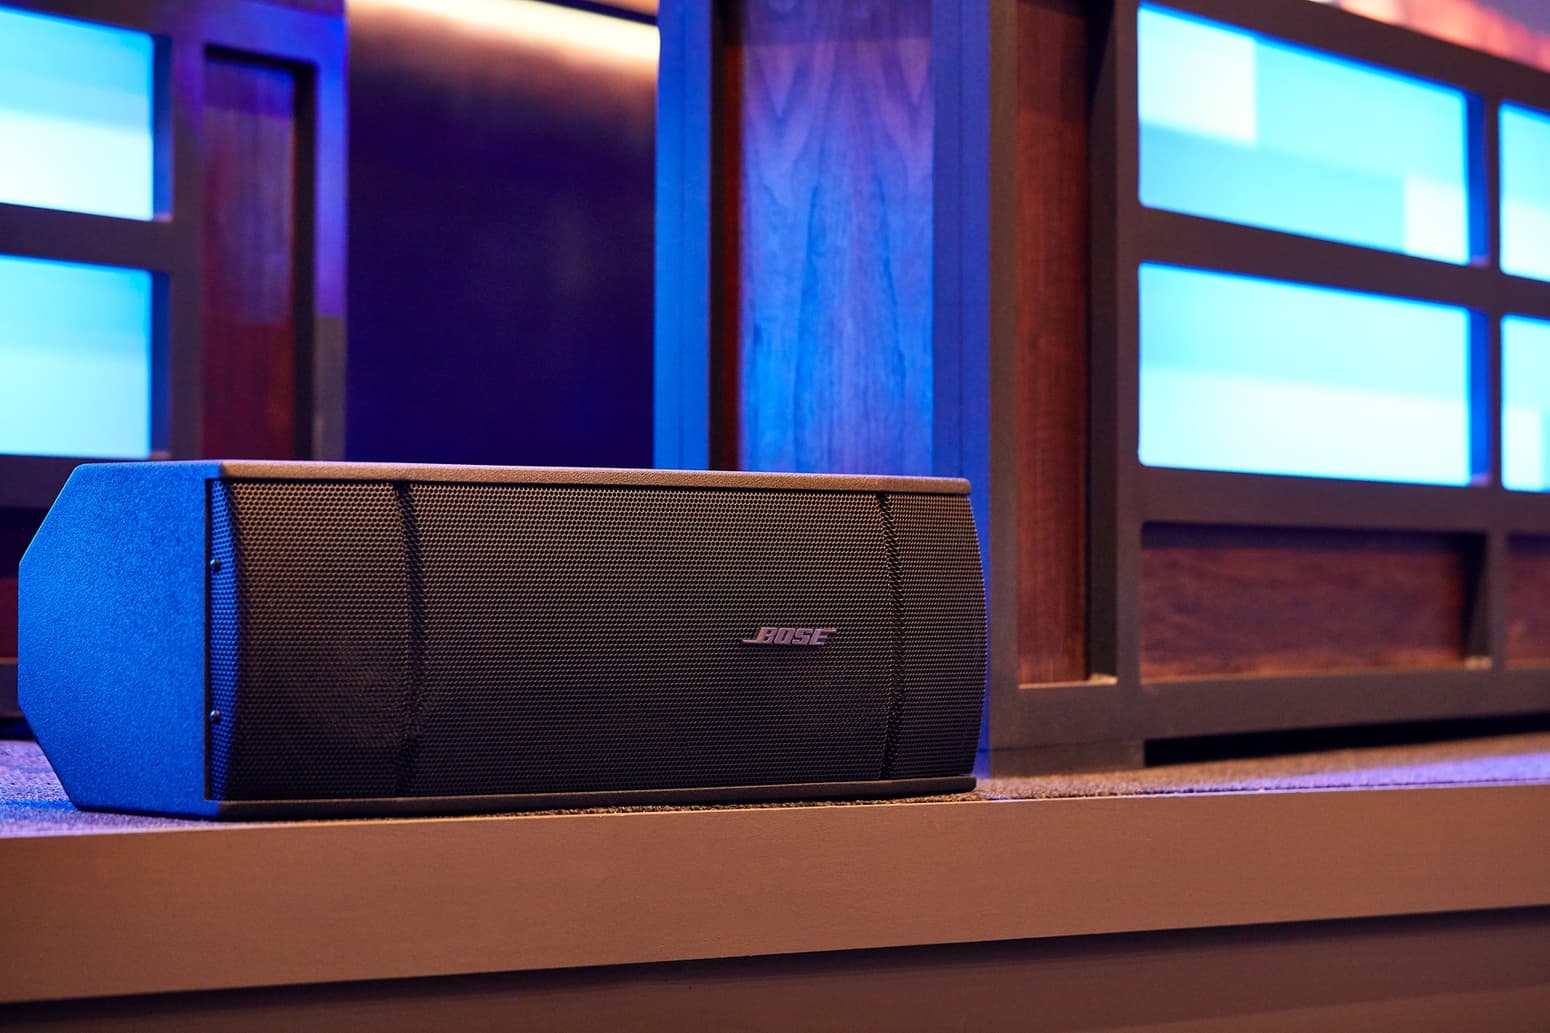 Bose speakers with AVL sound, installed for an audio design project by Paragon 360.